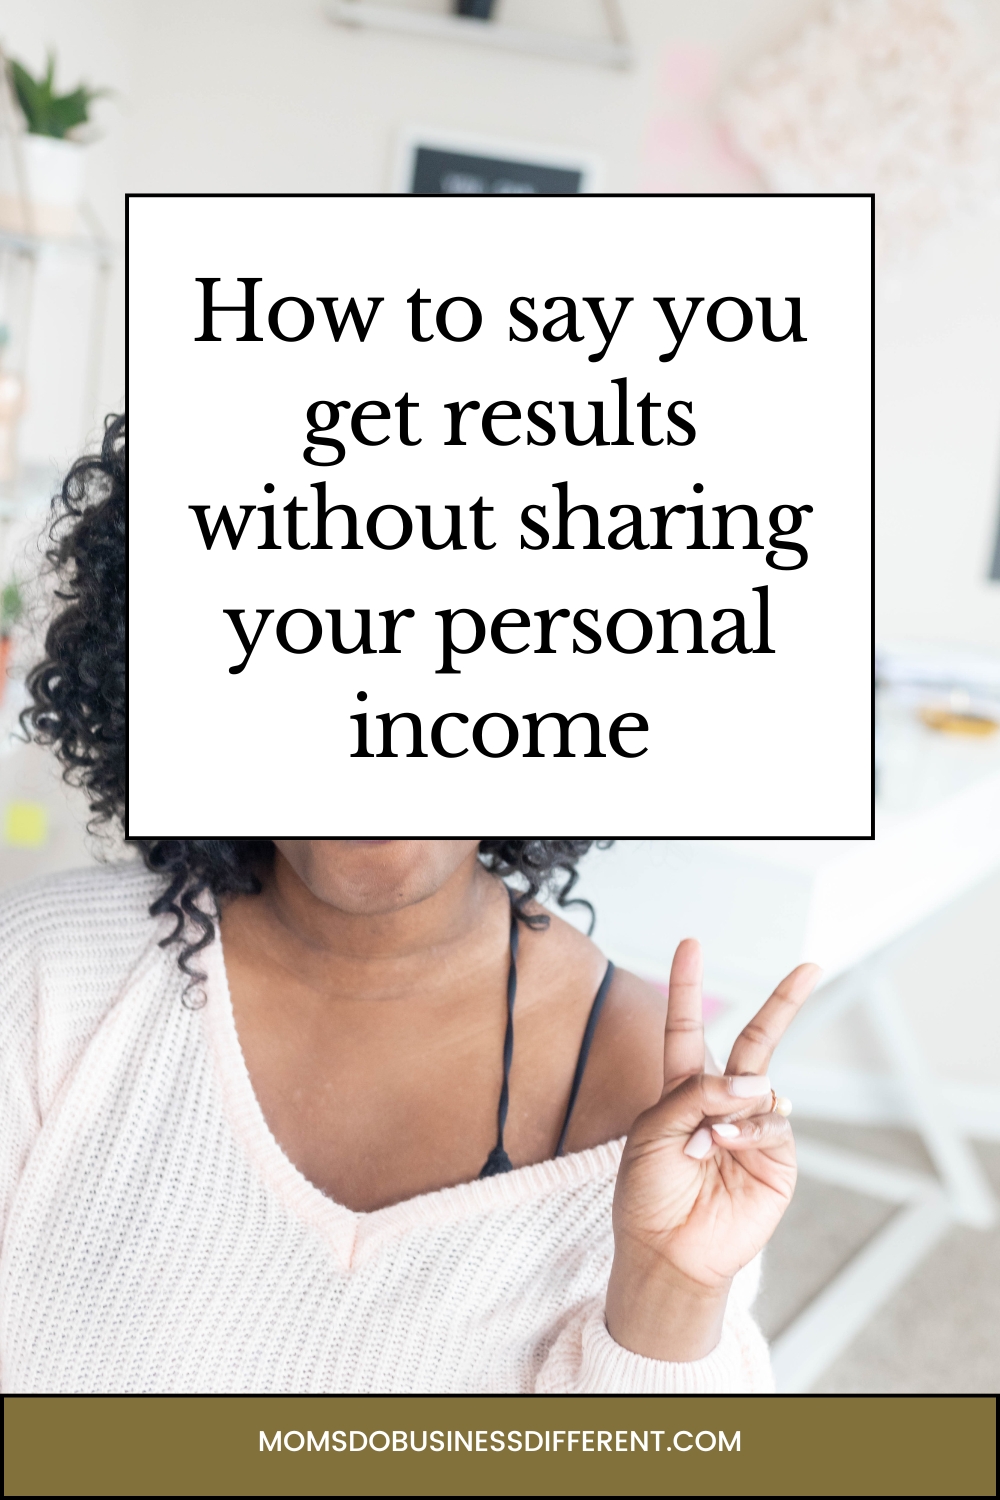 How to say you get results without sharing your personal income